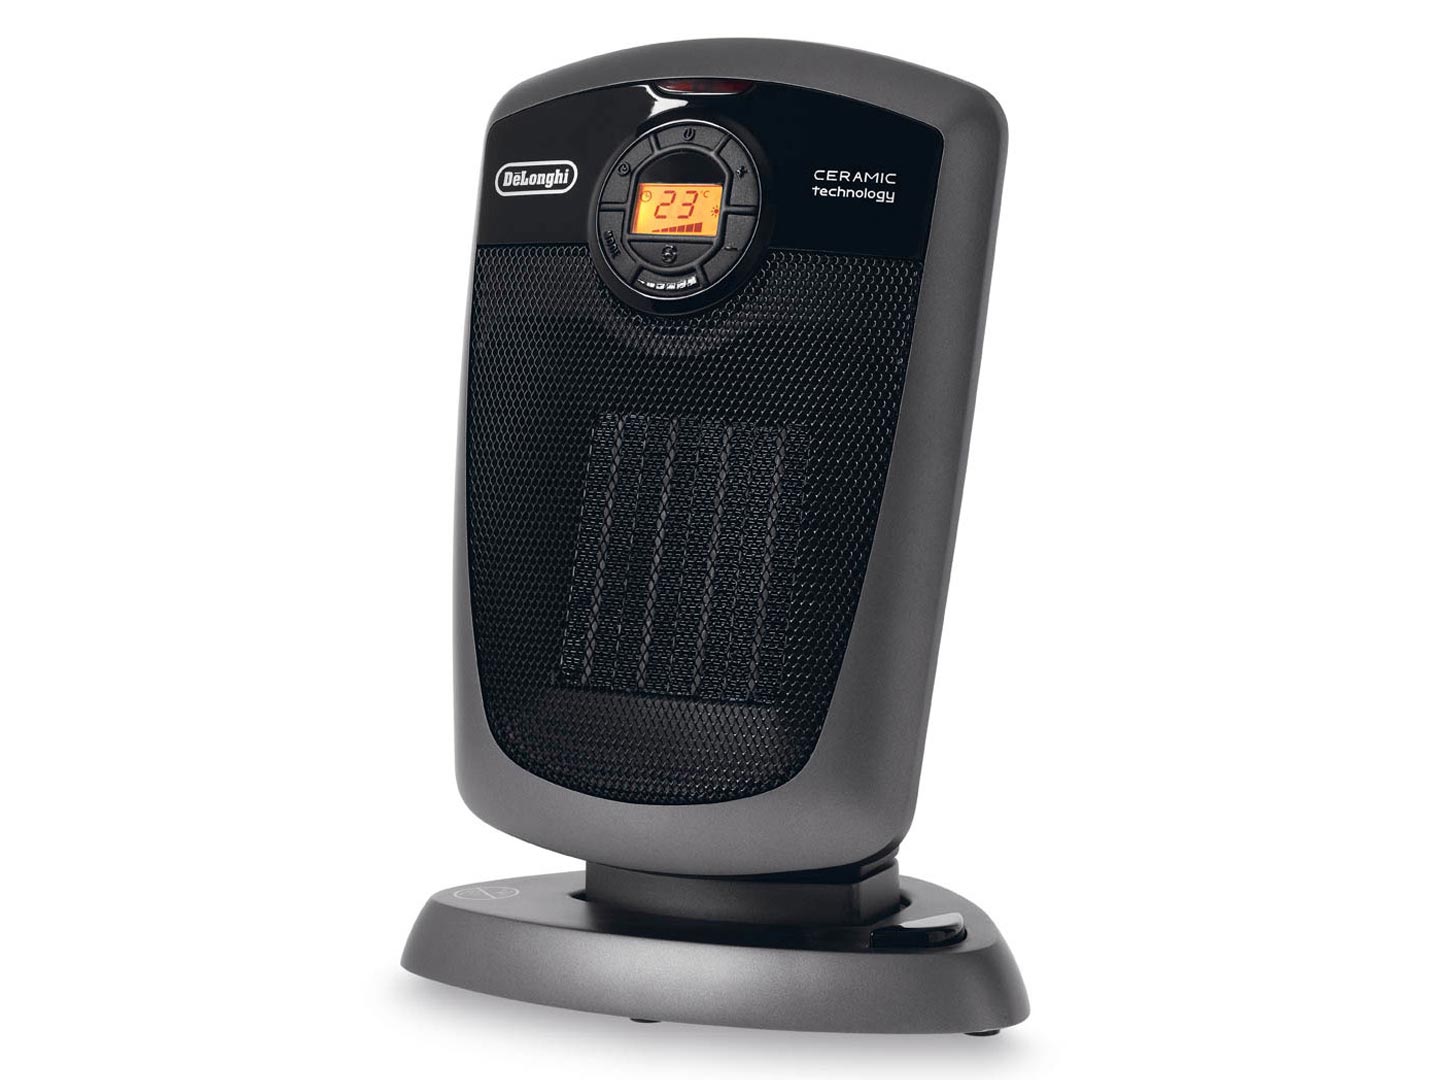 TCH7690EDR 3 Heat Settings Dark Gray Digital Adjustable Thermostat Timer 28 Design Remote Control ECO Energy Saving Mode Safety Features Quiet 1500W DeLonghi Ceramic Tower Heater